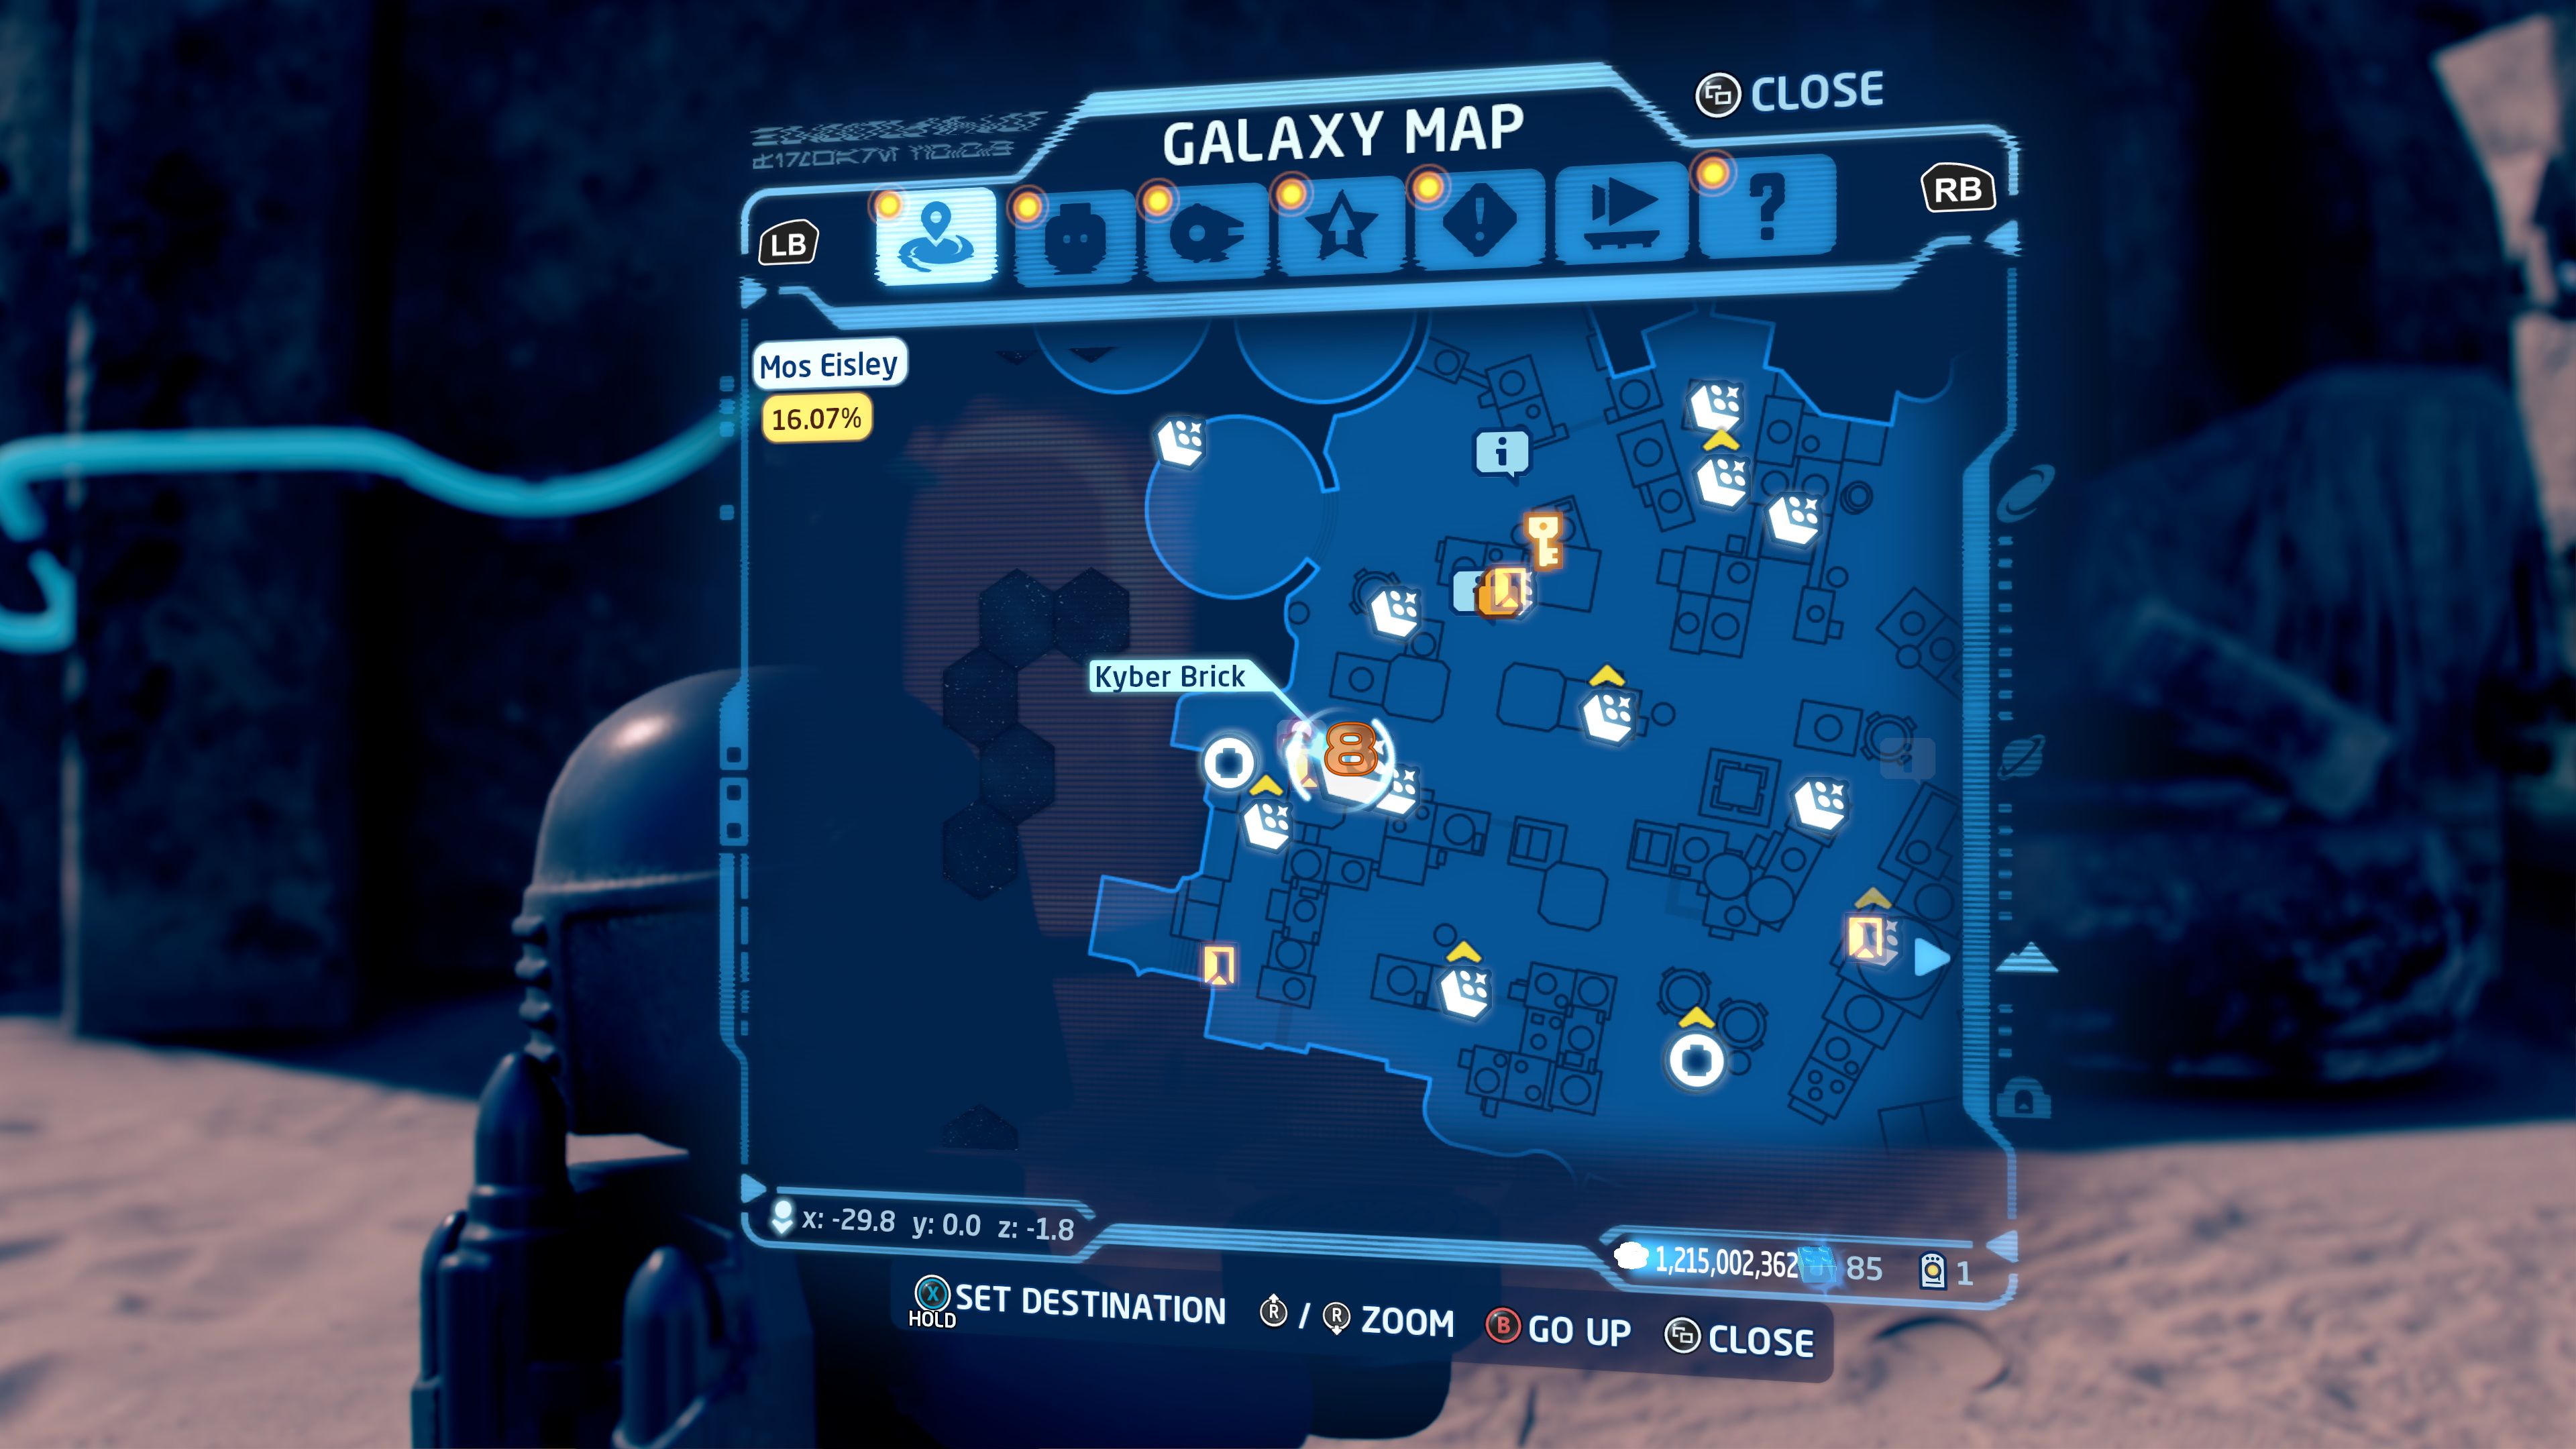 Map of Mos Eisley showing where the womp rat infested shop is located